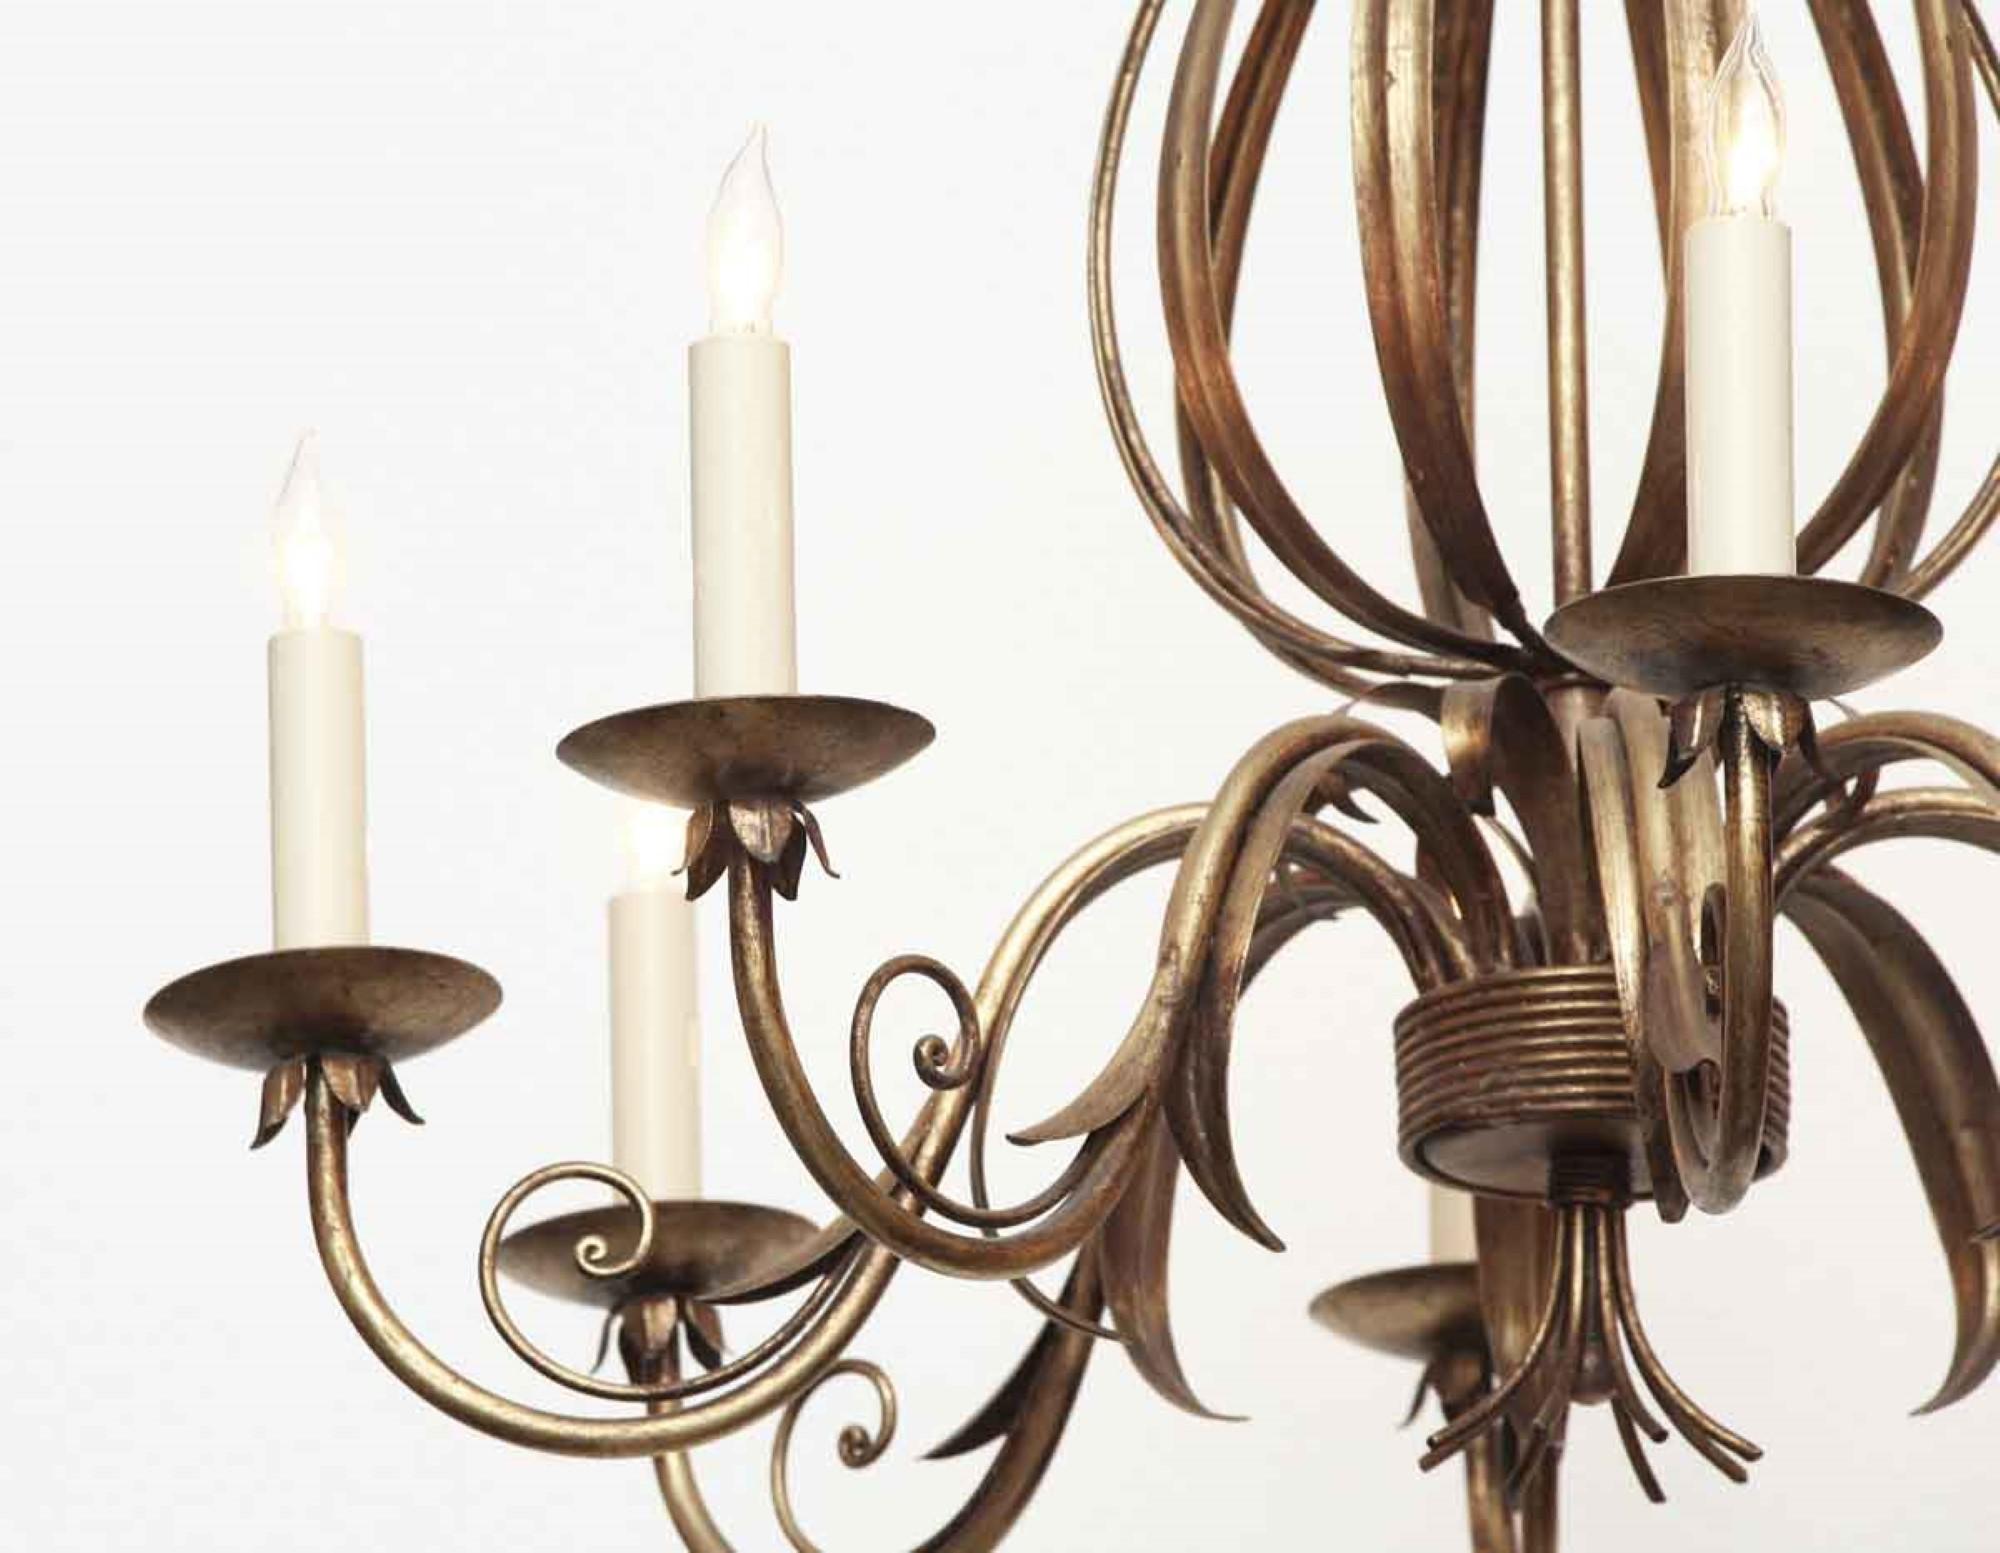 Contemporary 2000s Florentine Style 8-Arm Chandelier with Articulated and Wrought Iron Leaves